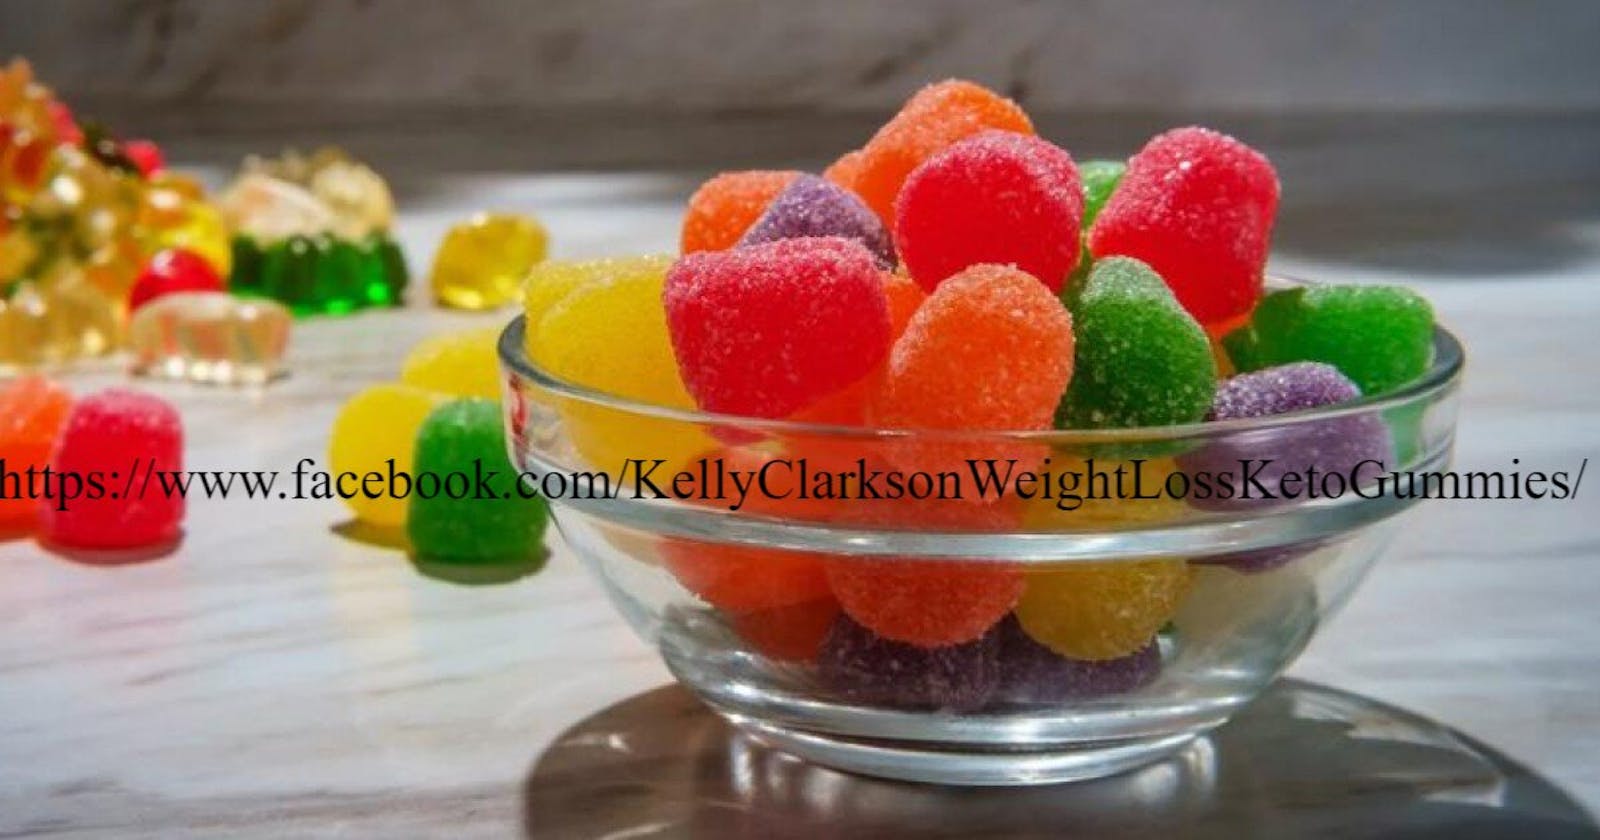 Kelly Clarkson Weight Loss Keto Gummies : Are These Fat Burning Gummies Legit?